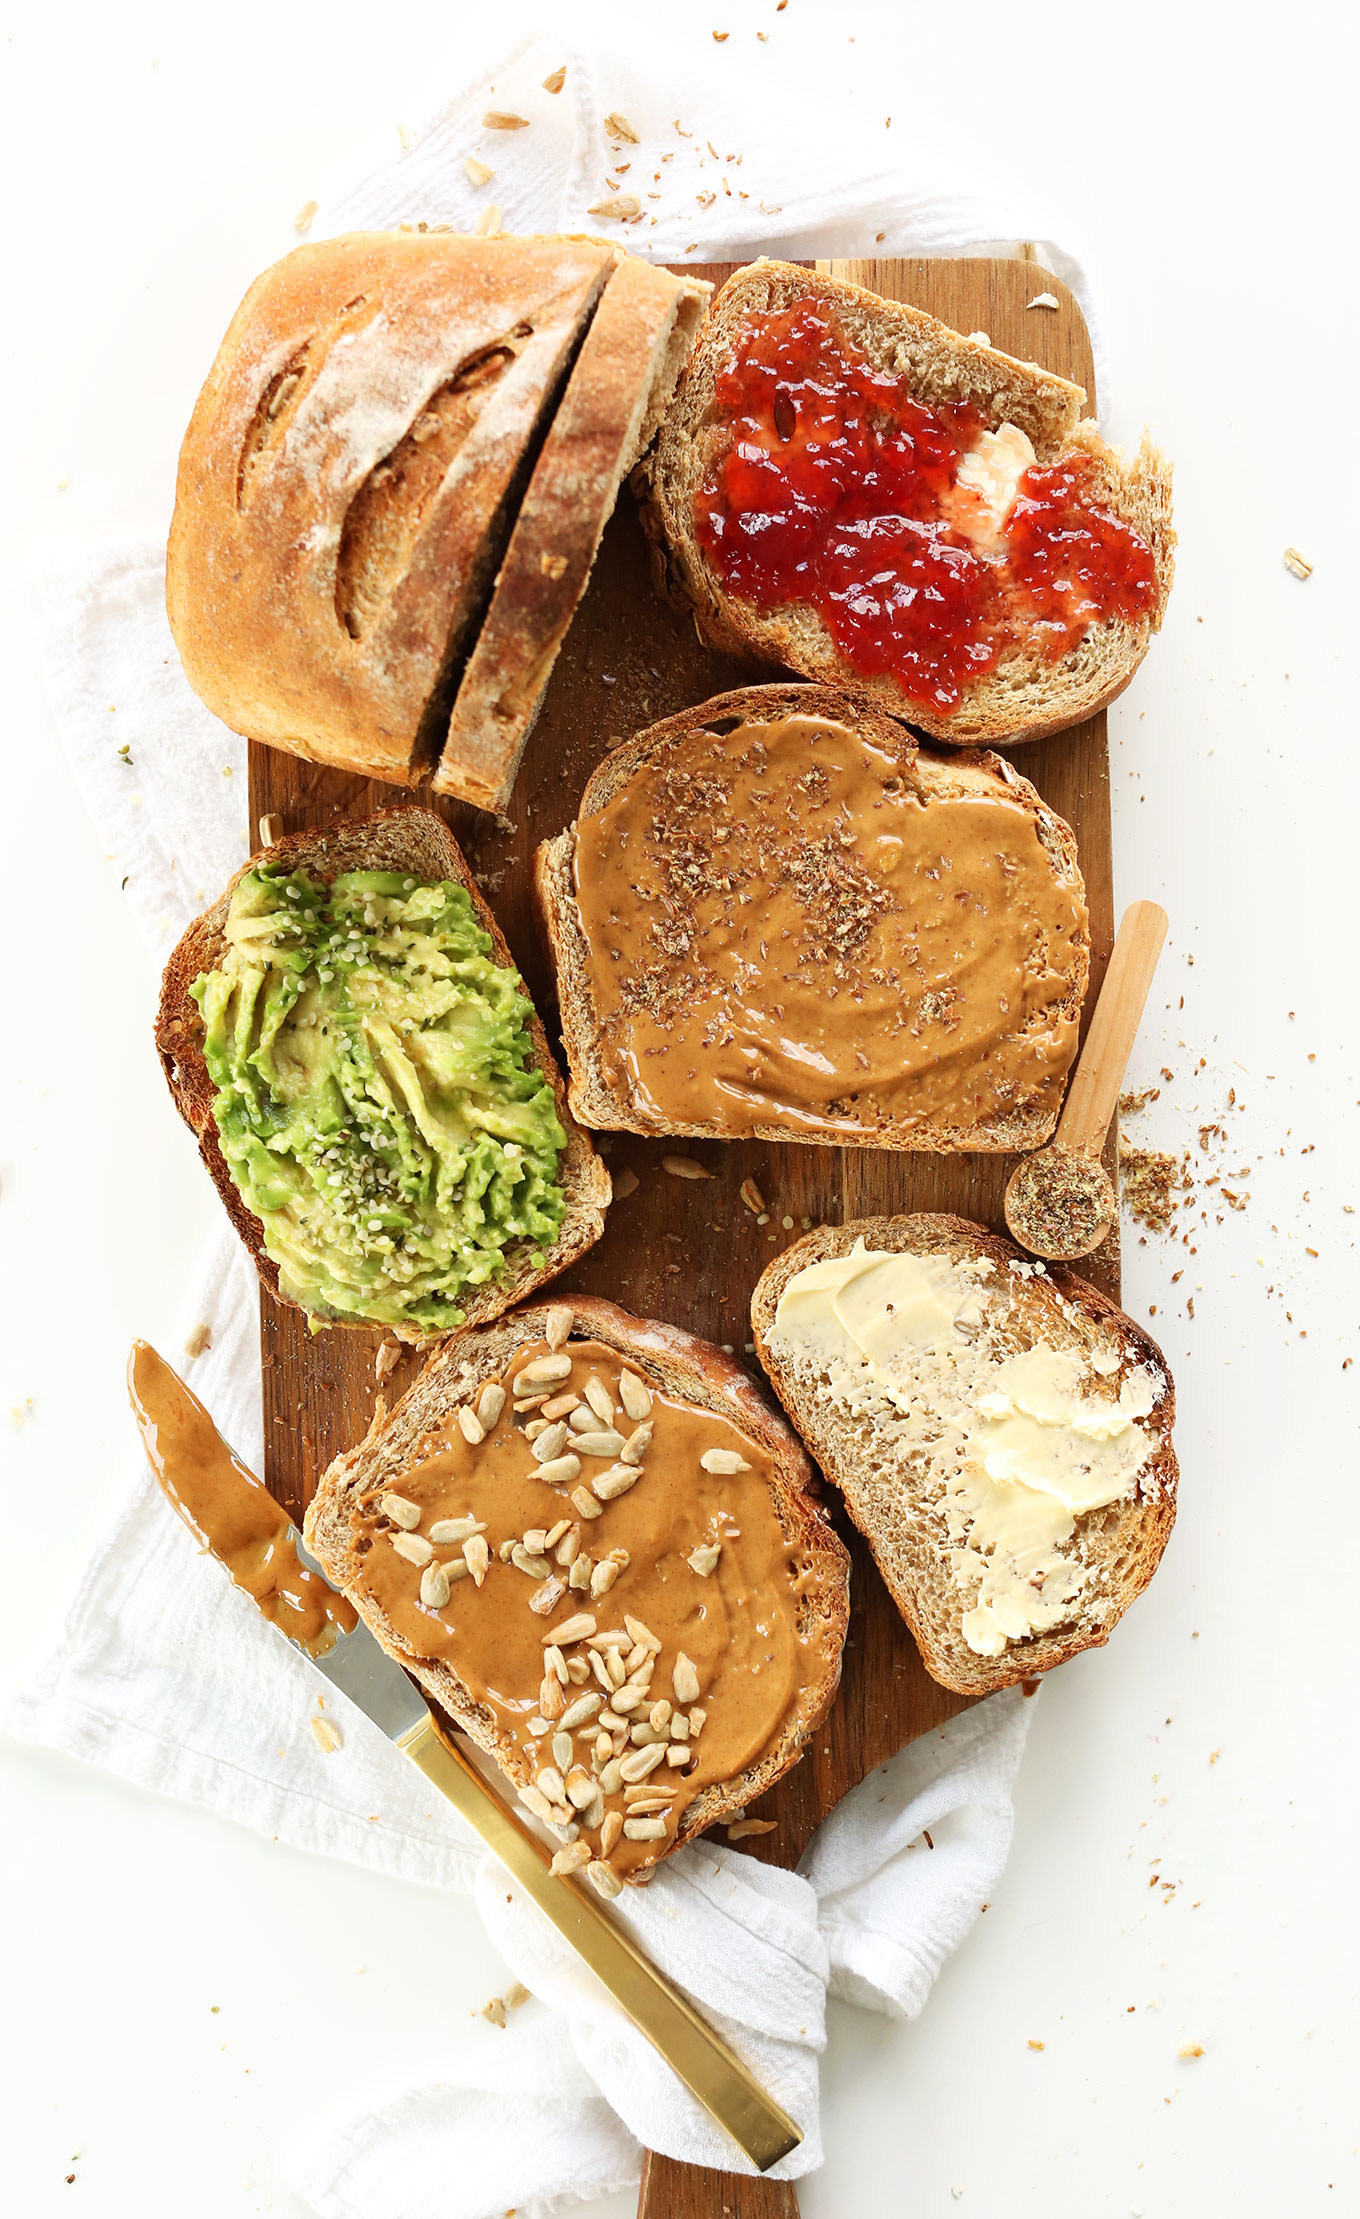 Slices of homemade bread with vegan butter, nut butter, avocado, and jam